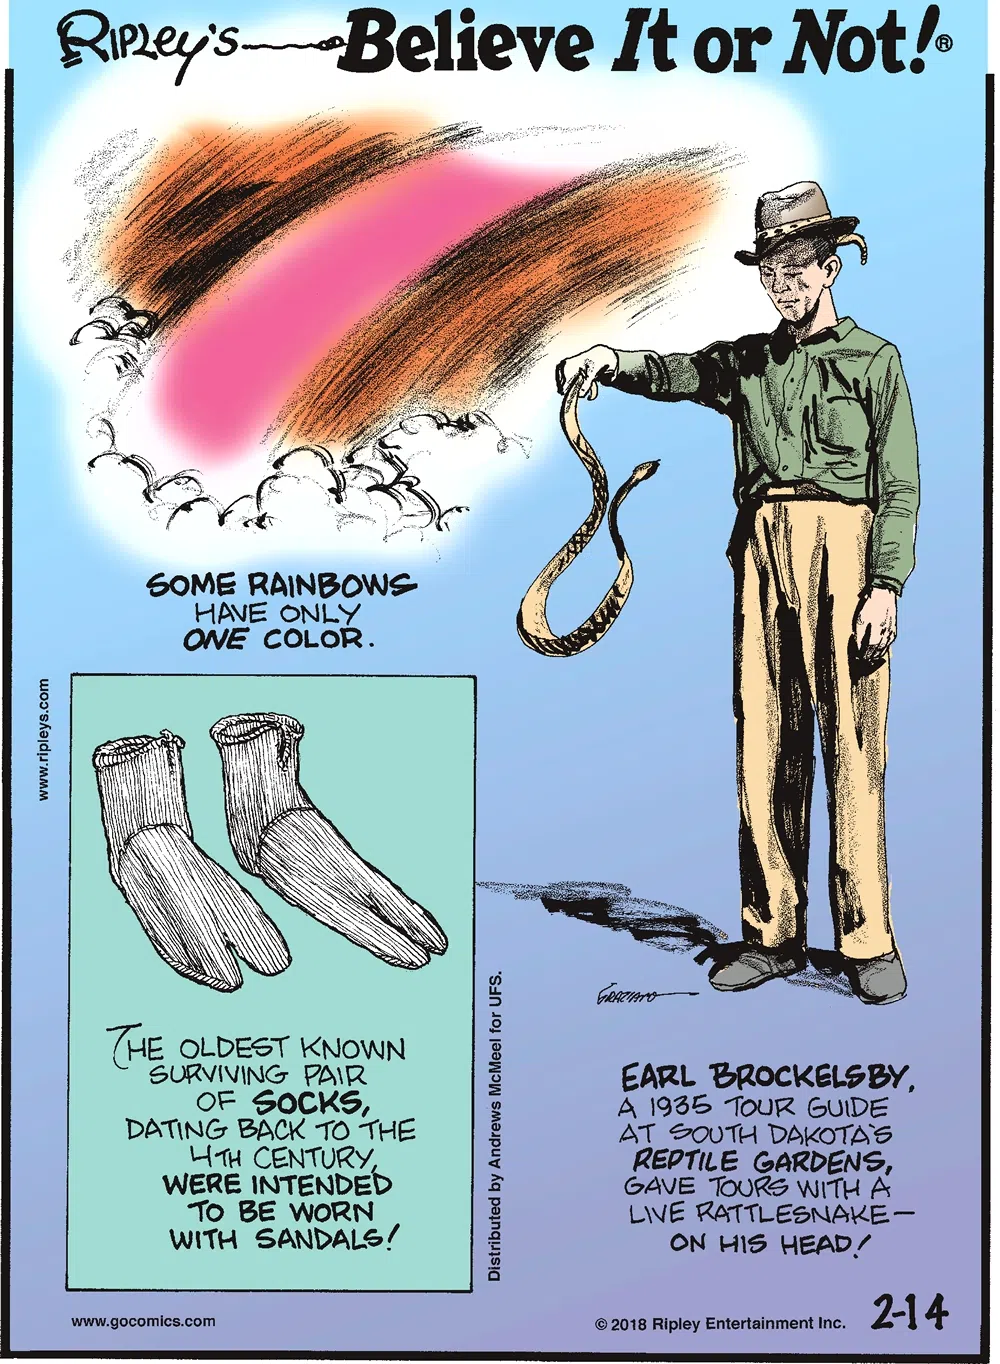 Some rainbows have only one color.-------------------- The oldest known surviving pair of socks, dating back to the 4th century, were invented to be worn with sandals!-------------------- Earl Brockelsby, a 1935 tour guide at South Dakota's Reptile Gardens, gave tours with a live rattlesnake - on his head!